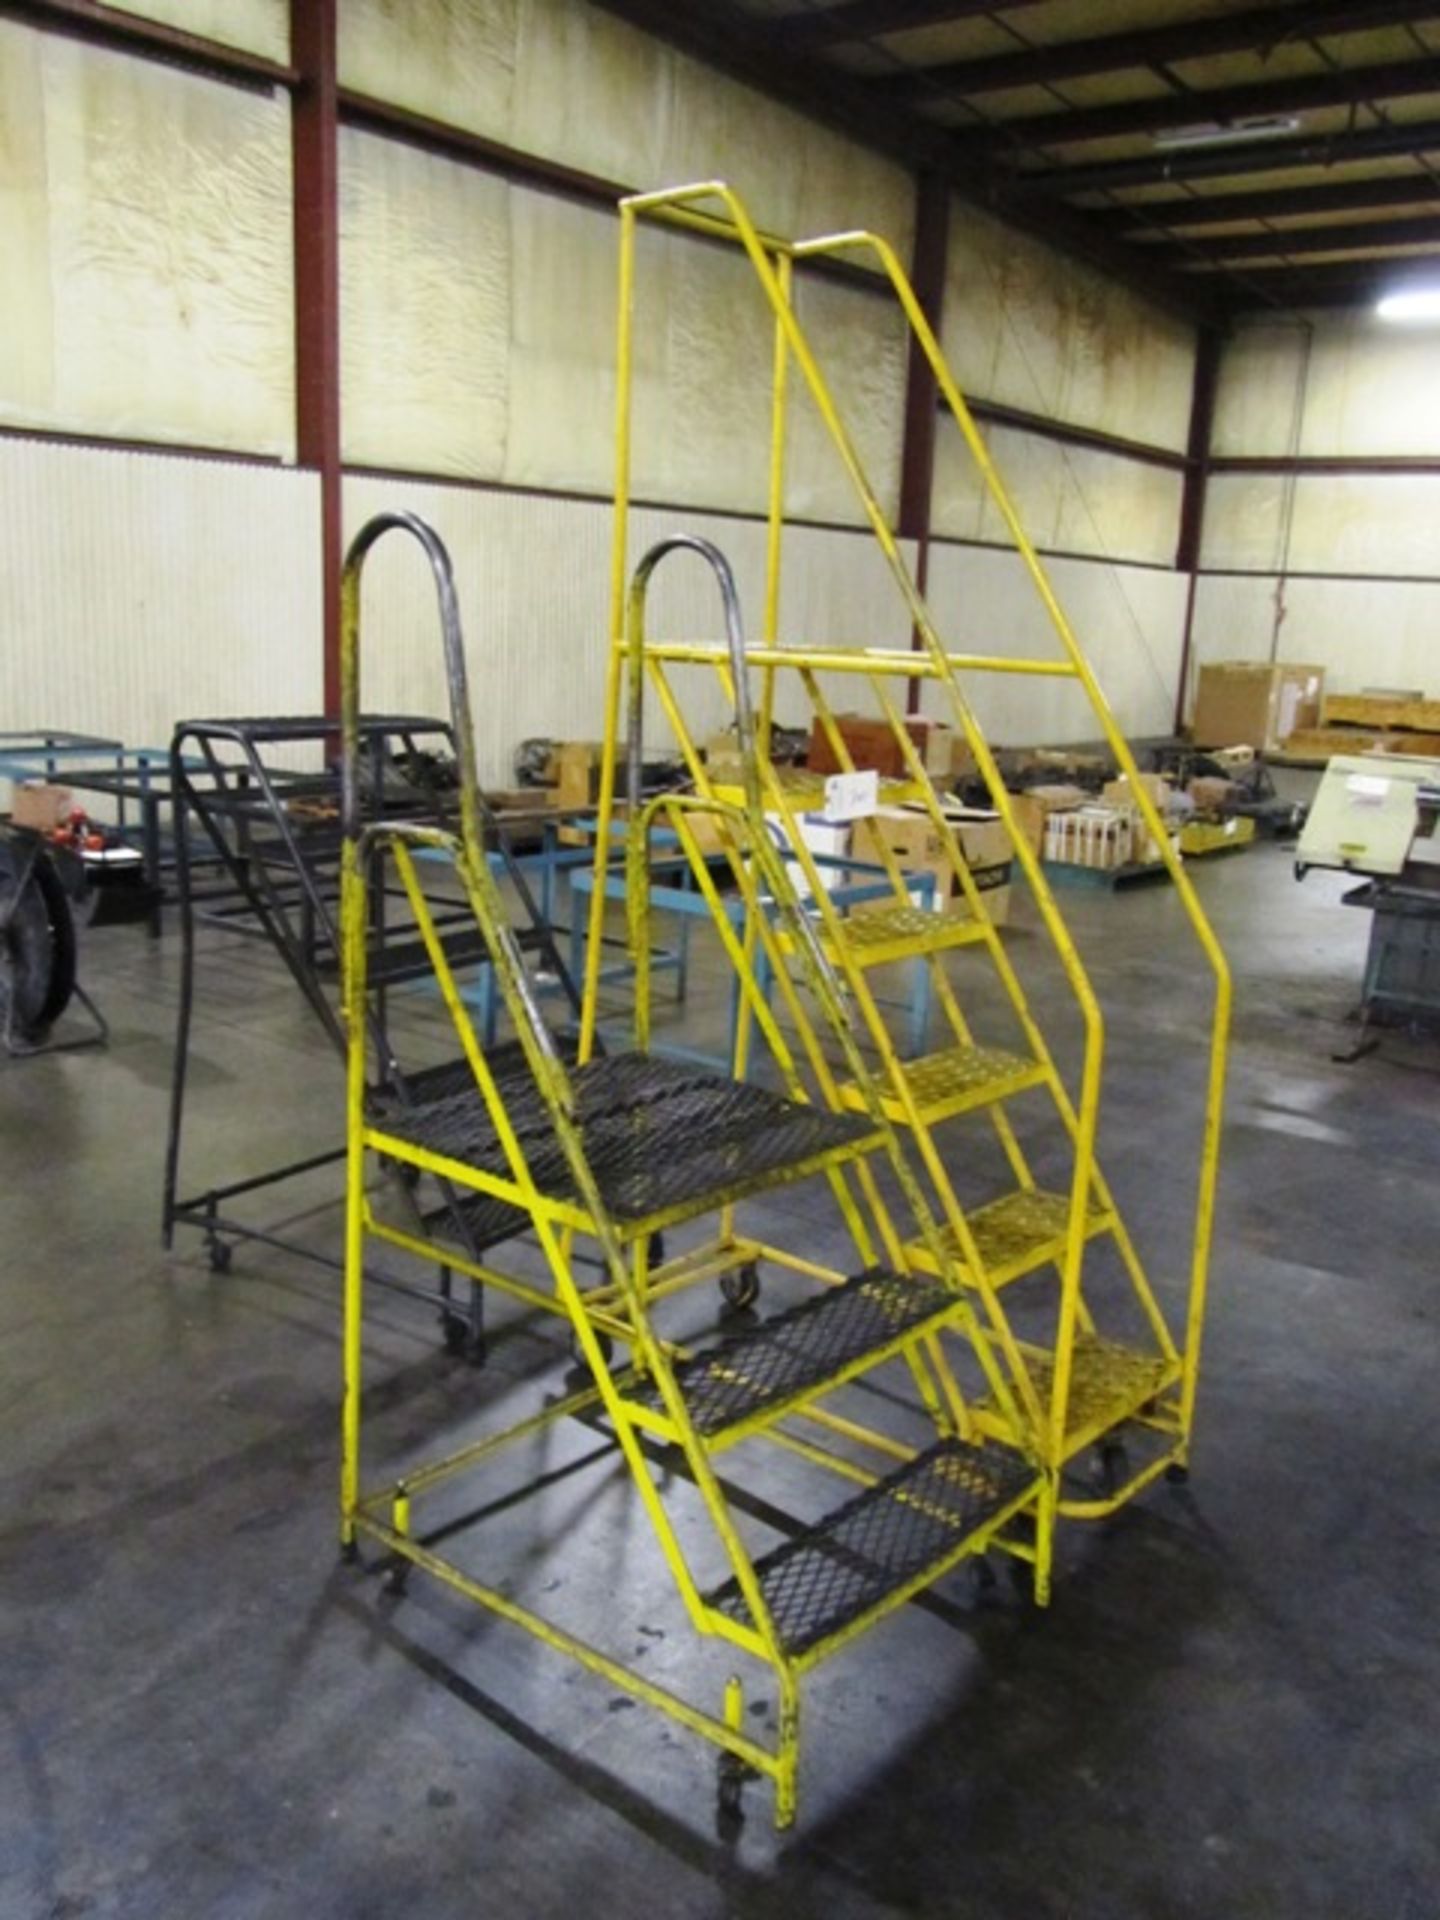 (2) Portable Stock Ladders